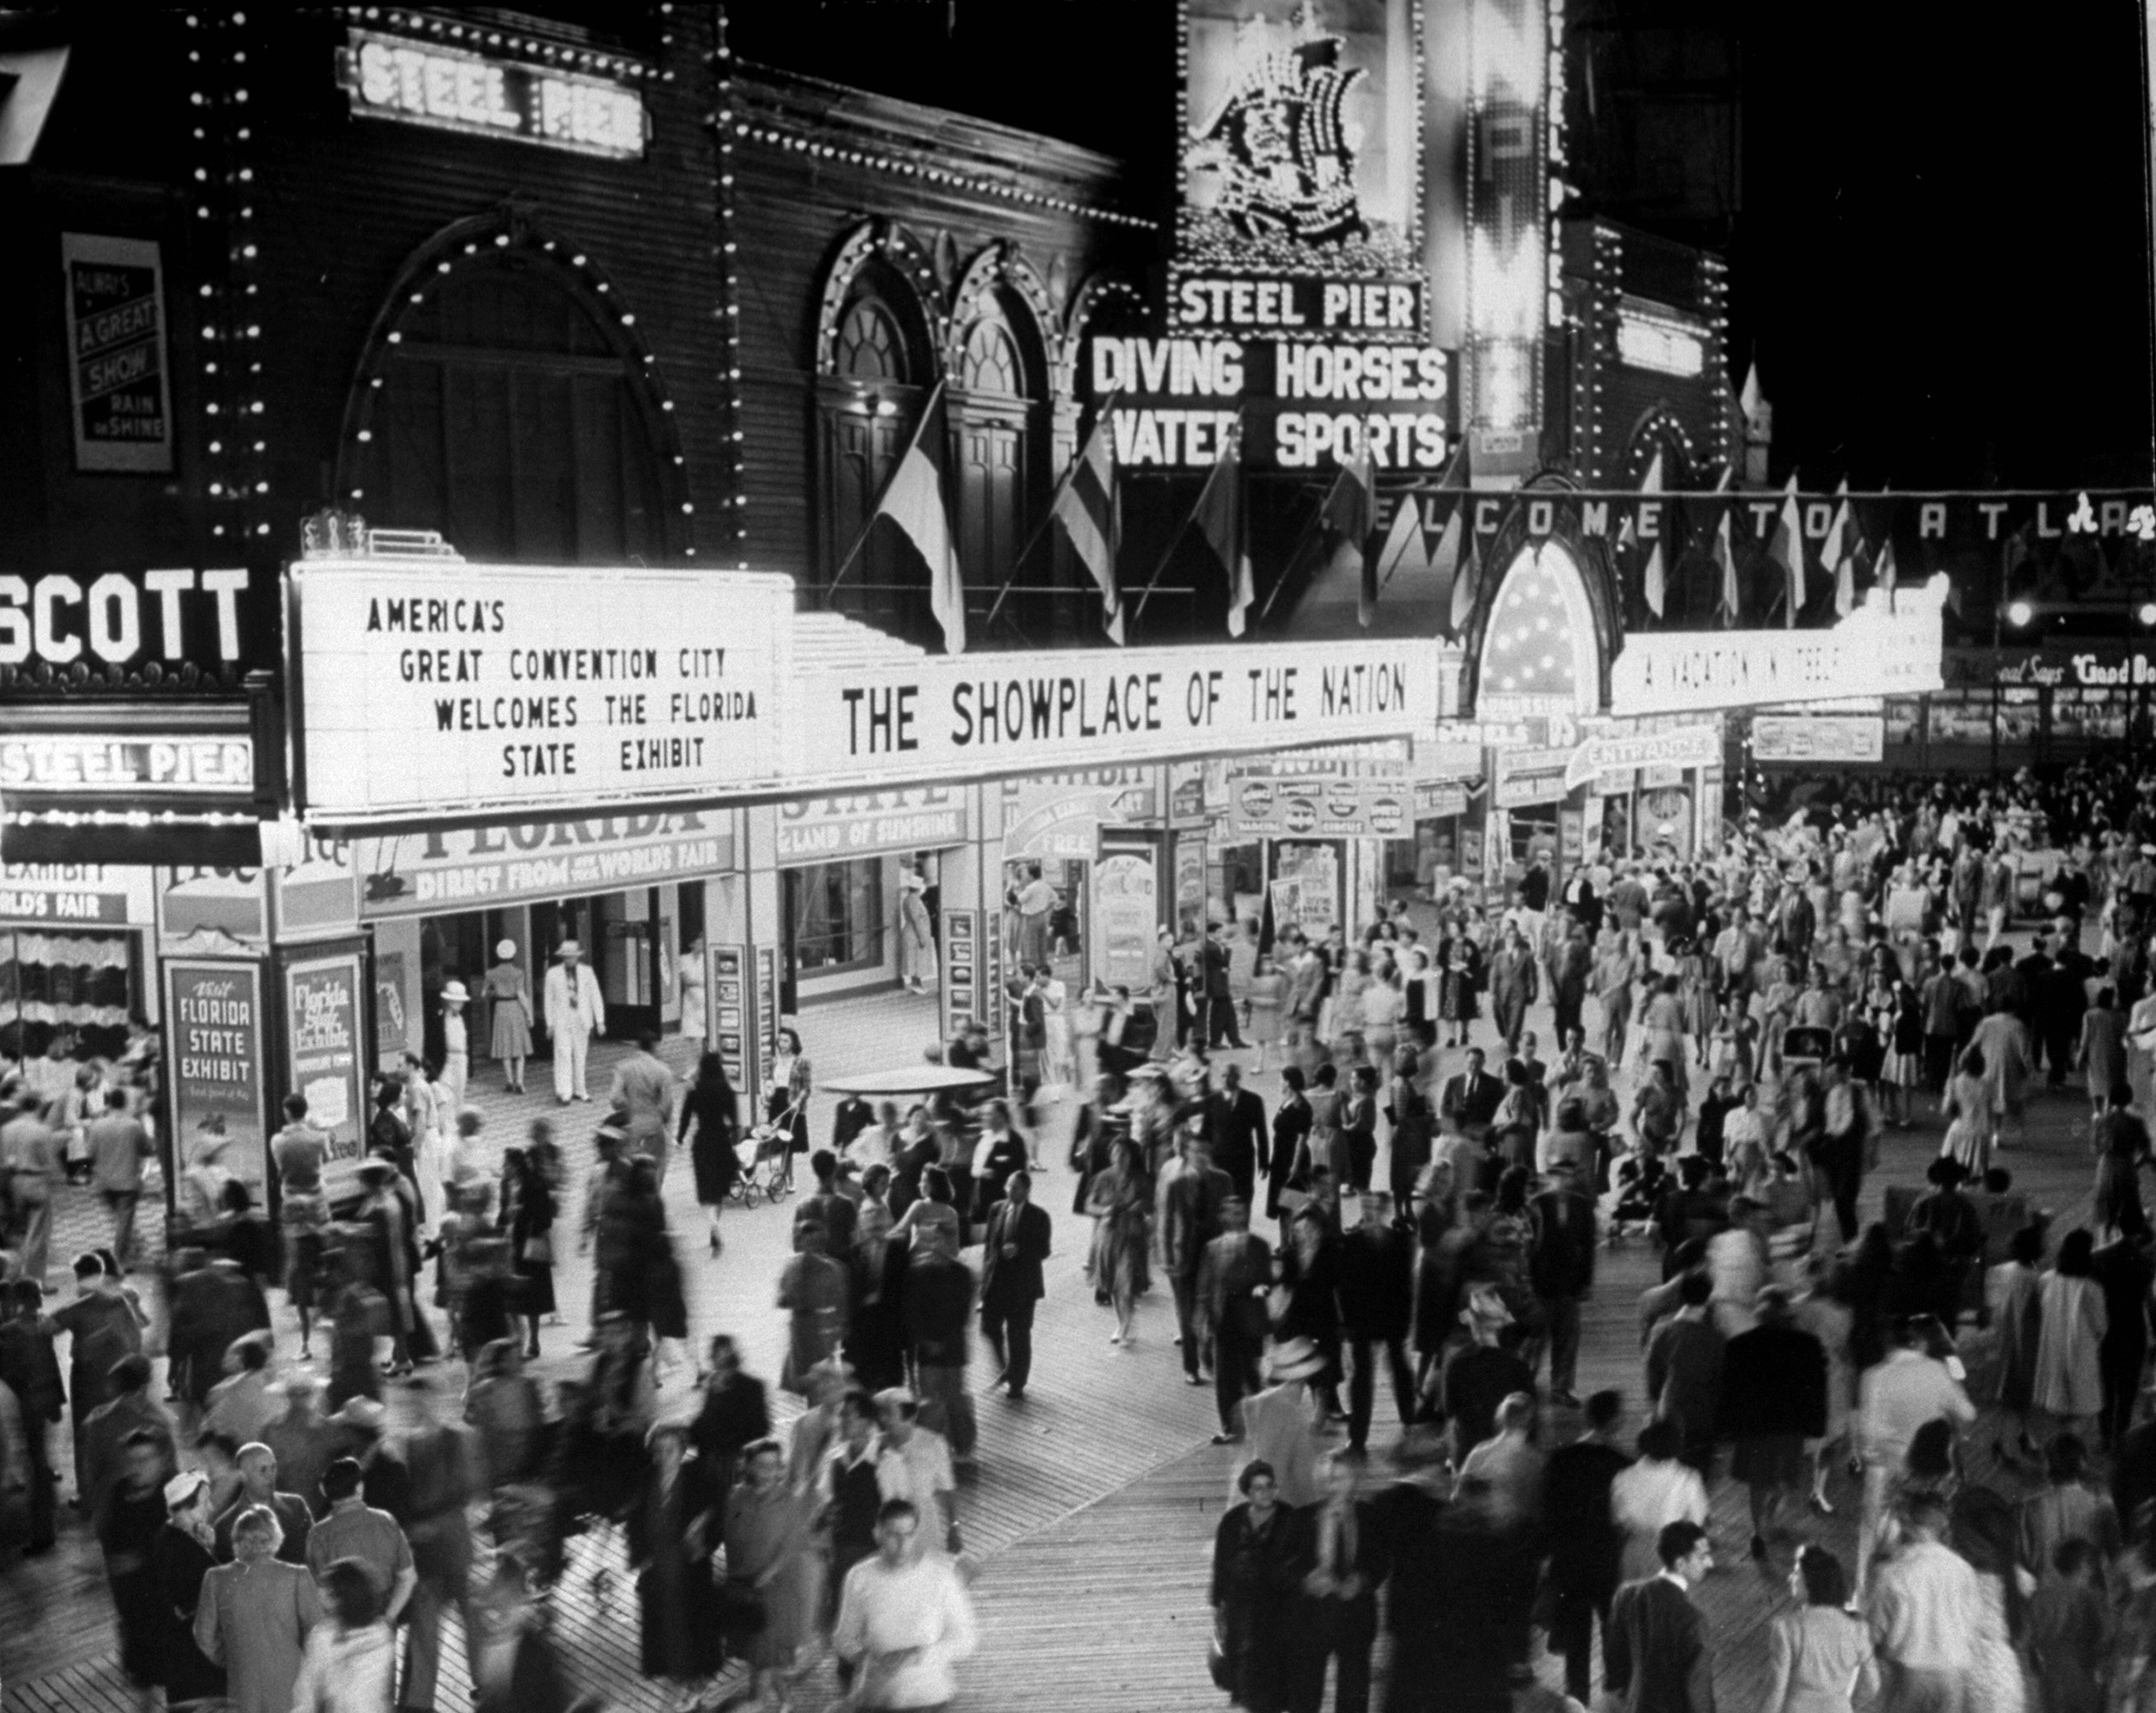 PHOTO: Nightime view of crowds gathering outside the Steel Pier in Atlantic City, N.J., July 1, 1941.